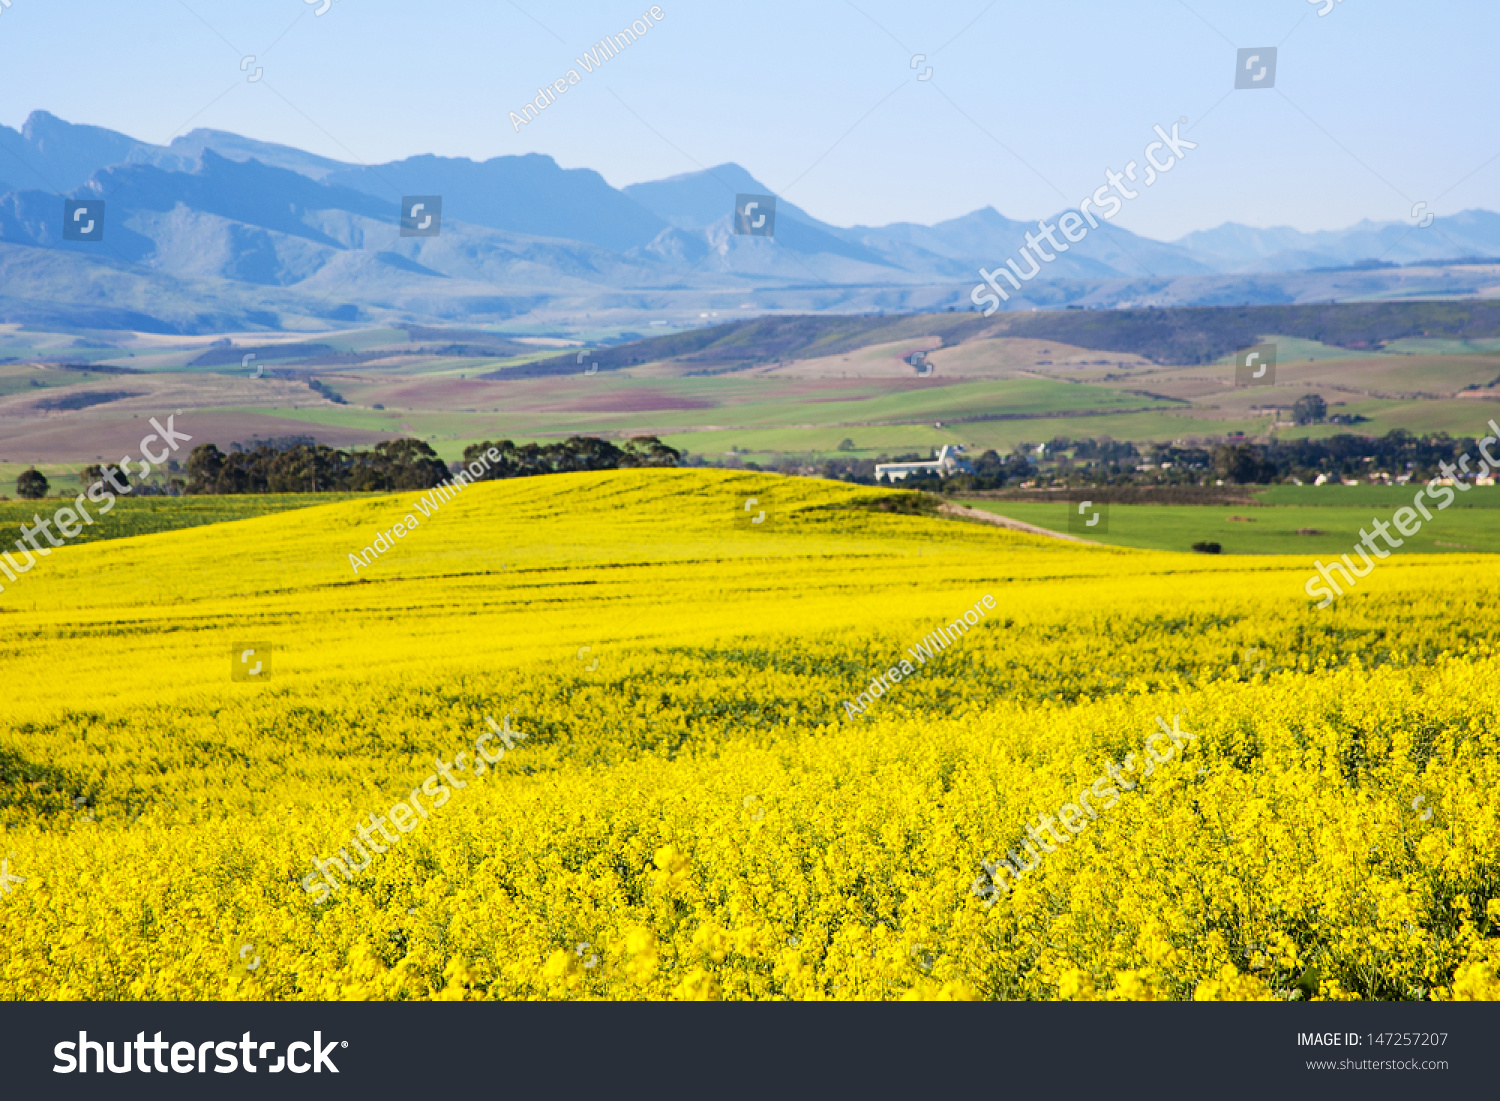 Rapeseed fields along the Garden Route, N2, South Africa. Rapeseed is used to produce canola oil. #147257207